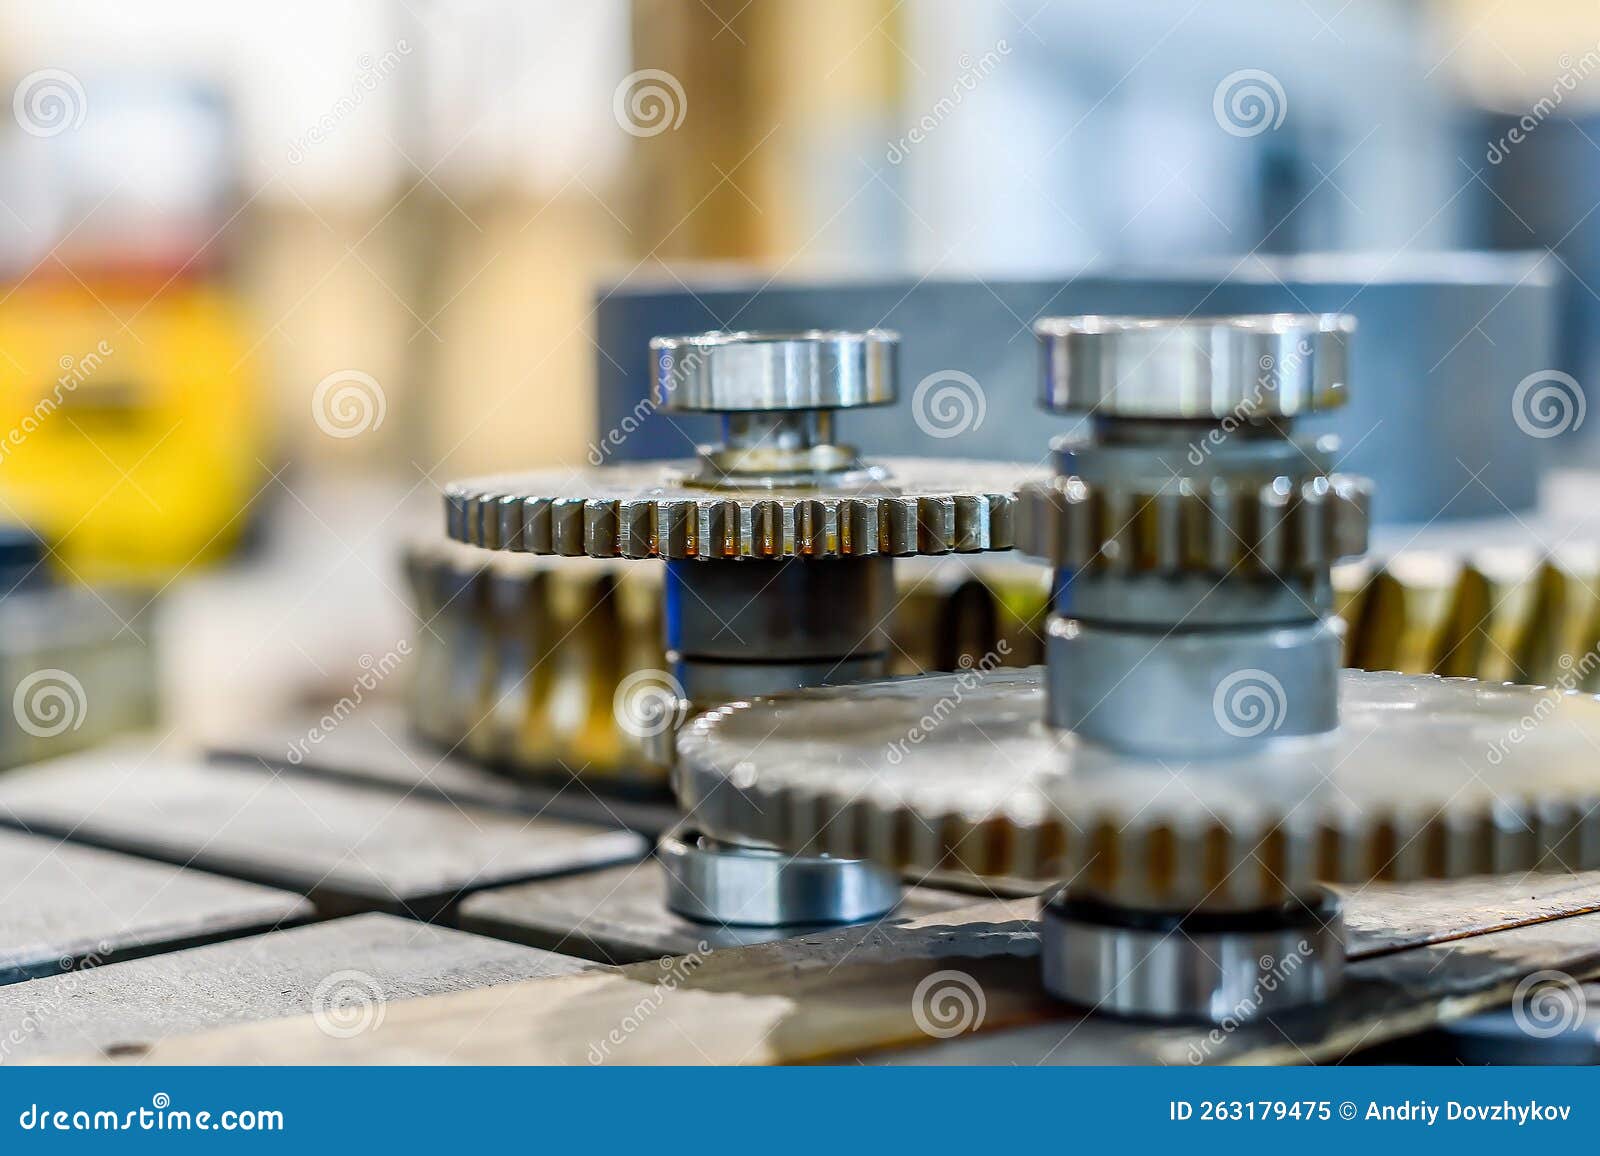 gears for transmission of speeds and revolutions with bearings of a cnc machine tool. mixed equipment repair